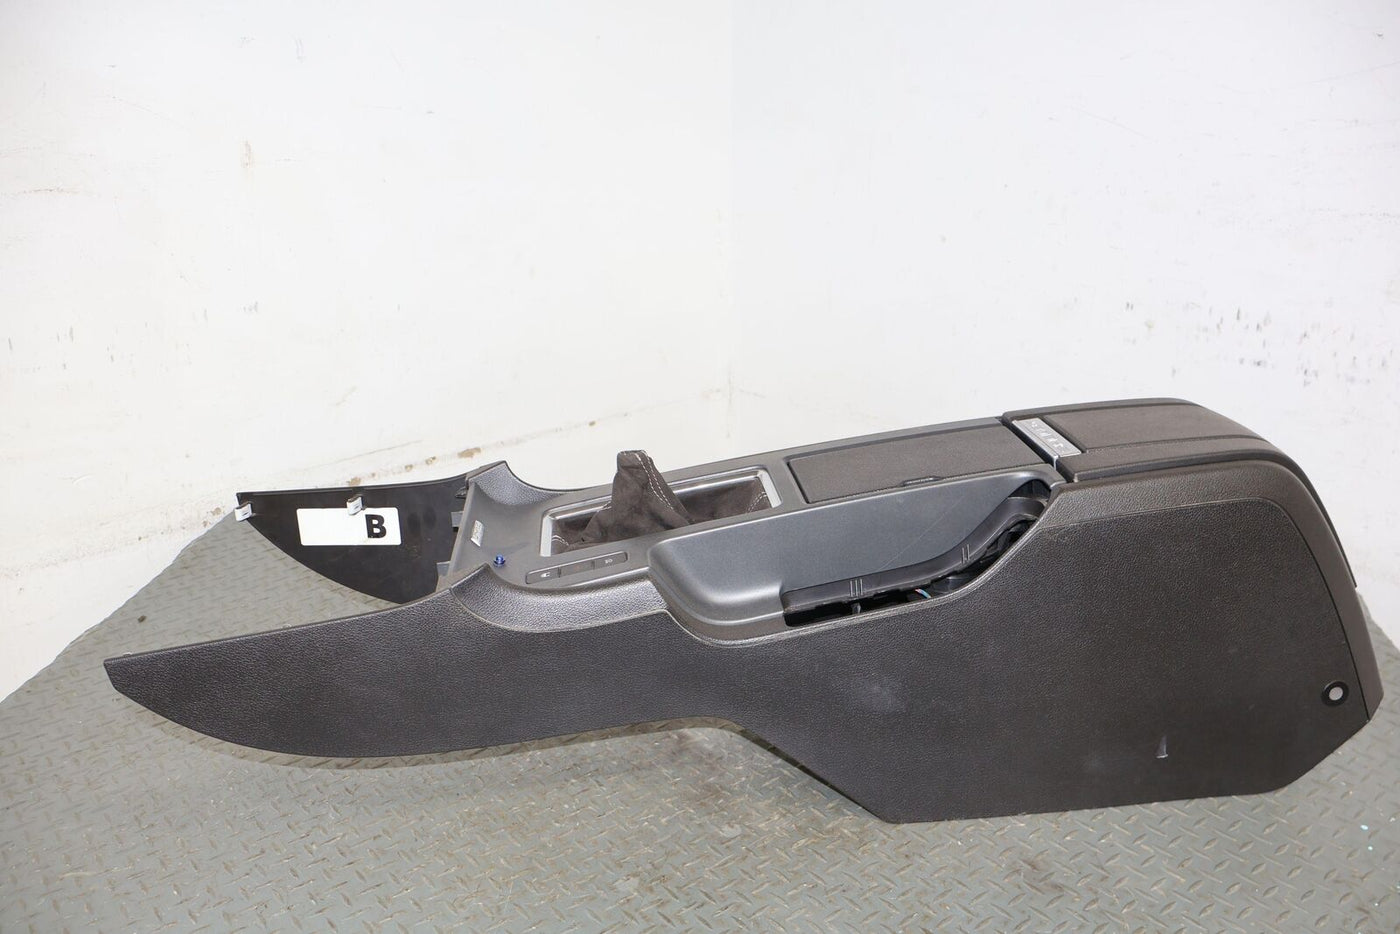 10-14 Ford Mustang GT500 Floor Console W/ Lid & Doors (Black) See Notes